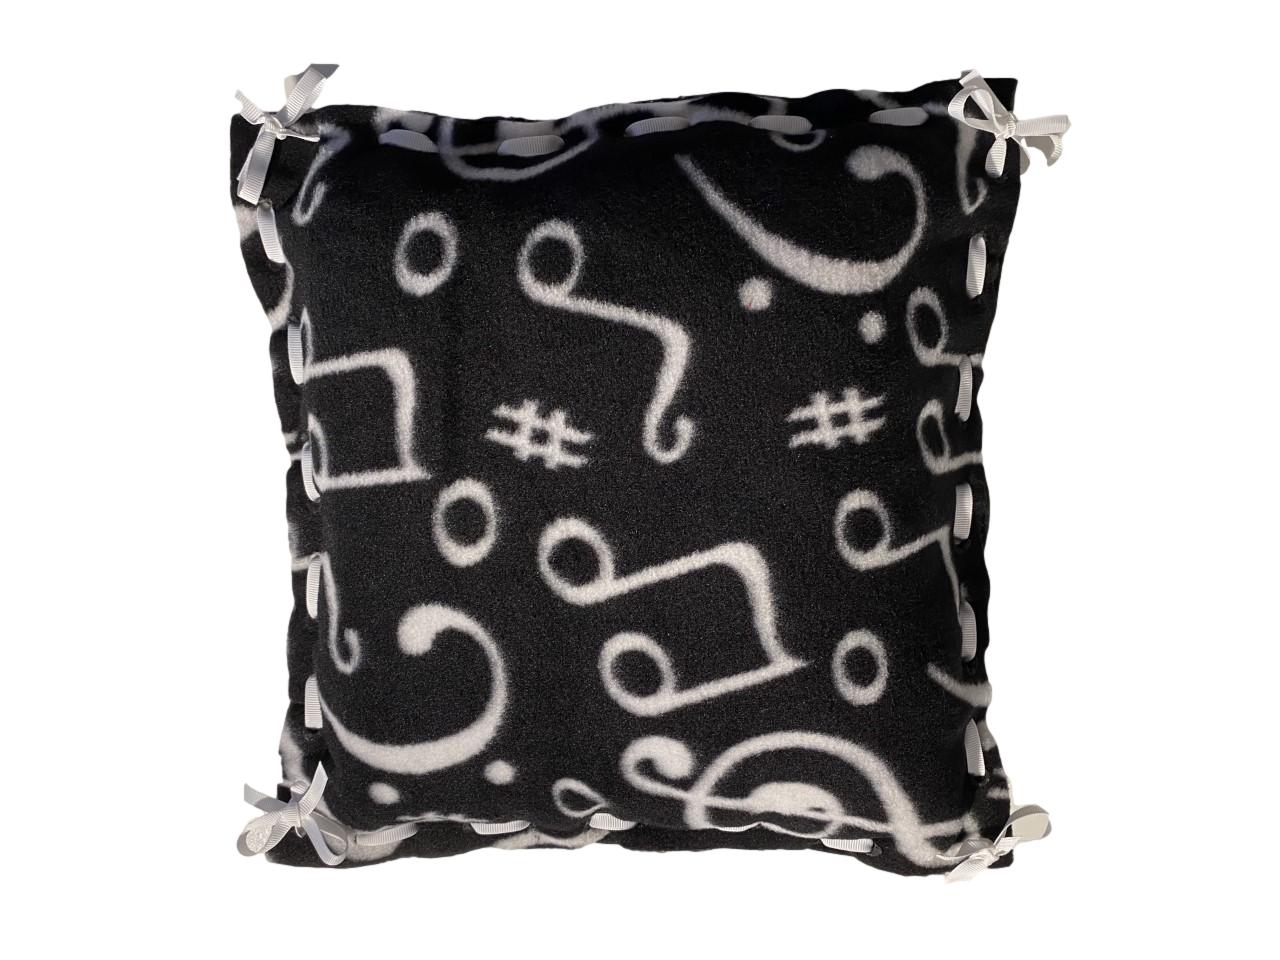 13 inch fleece no sew pillow - black with white music notes and white ribbon